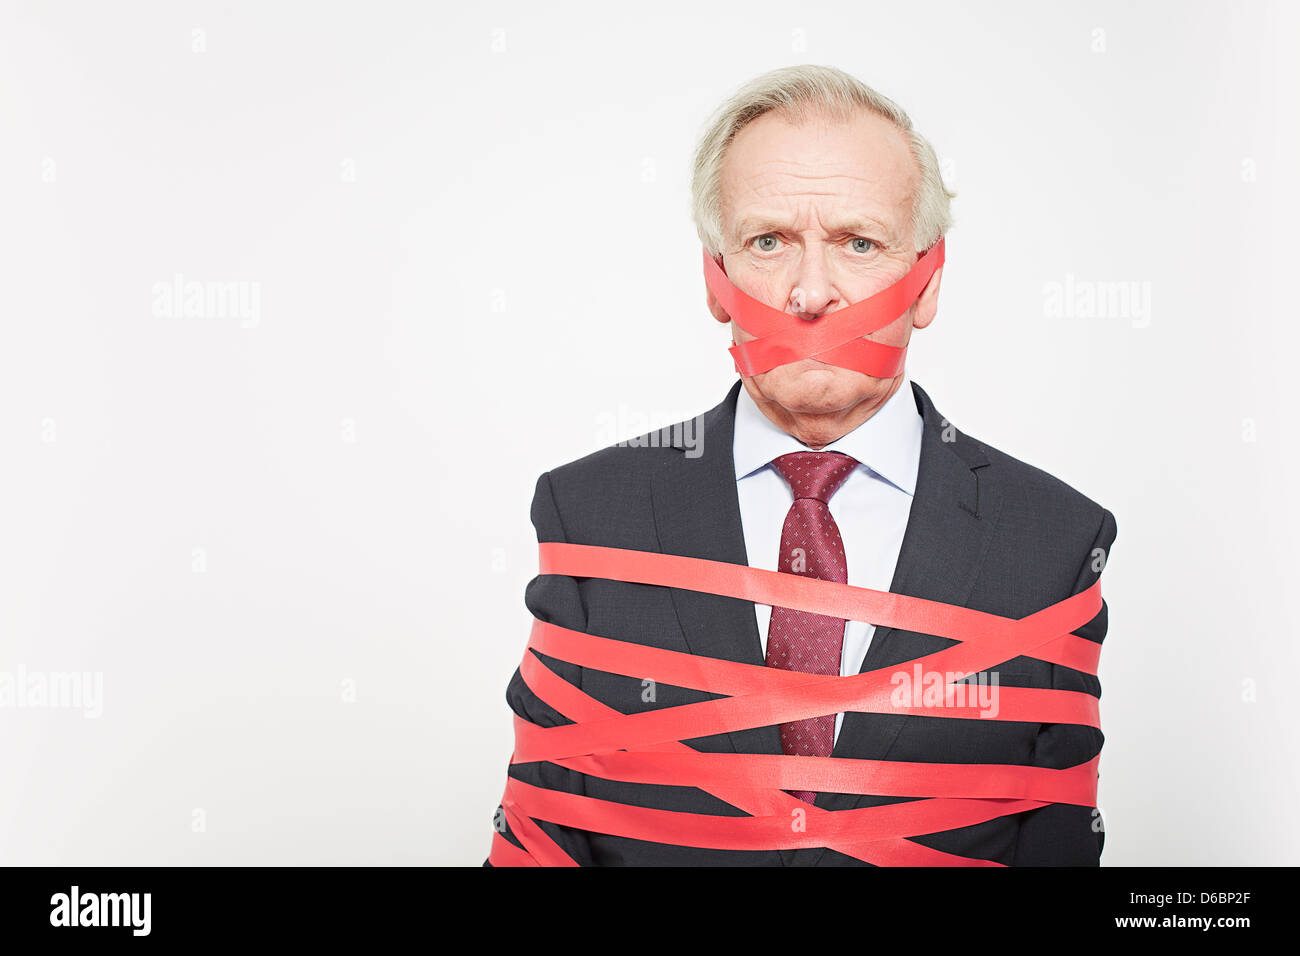 Businessman wrapped in red tape Stock Photo